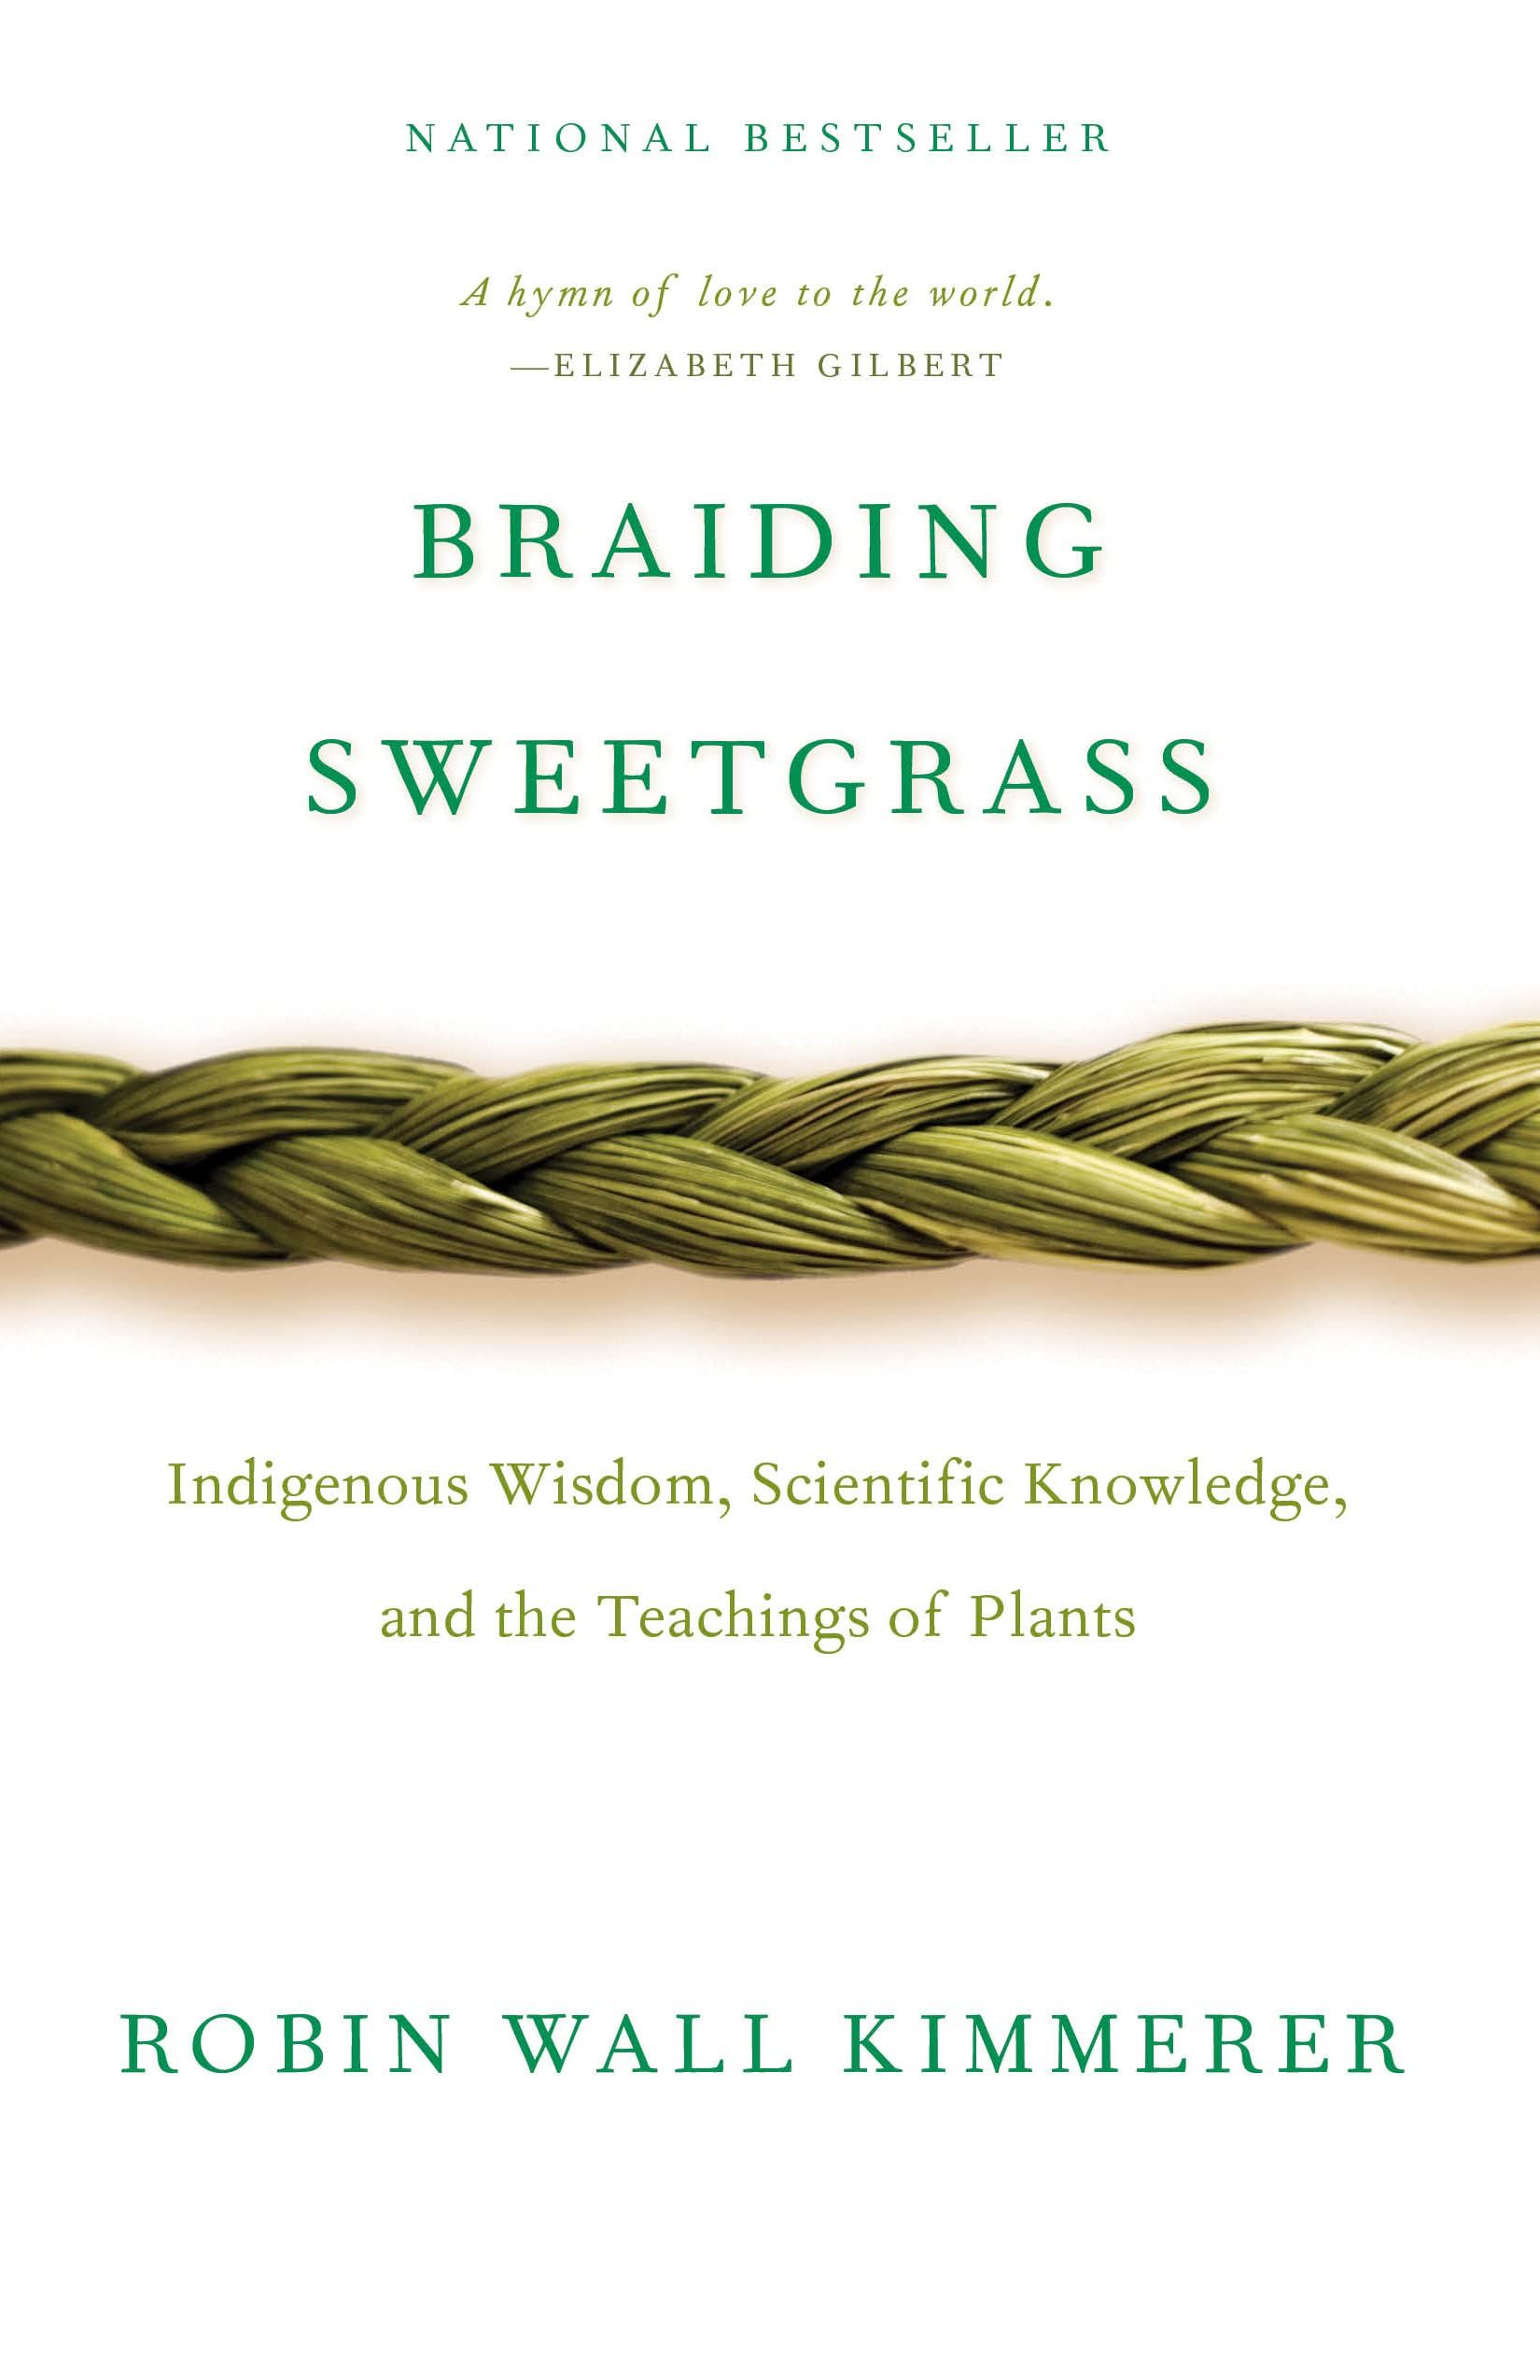 <p><strong>$13.25</strong></p><p>Robin Wall Kimmerer’s essay collection is a masterful exploration of the power of nature and environmental regeneration (how some plants and animals have the ability to naturally restore damaged or missing cells, tissues, organs, and body parts). The Native American botanist and professor of environmental and forest biology weaves in the wisdom passed down from her lineage of Potawatomi elders to highlight how nature is our greatest teacher. Who knew the plant kingdom was so ripe for life lessons?</p>